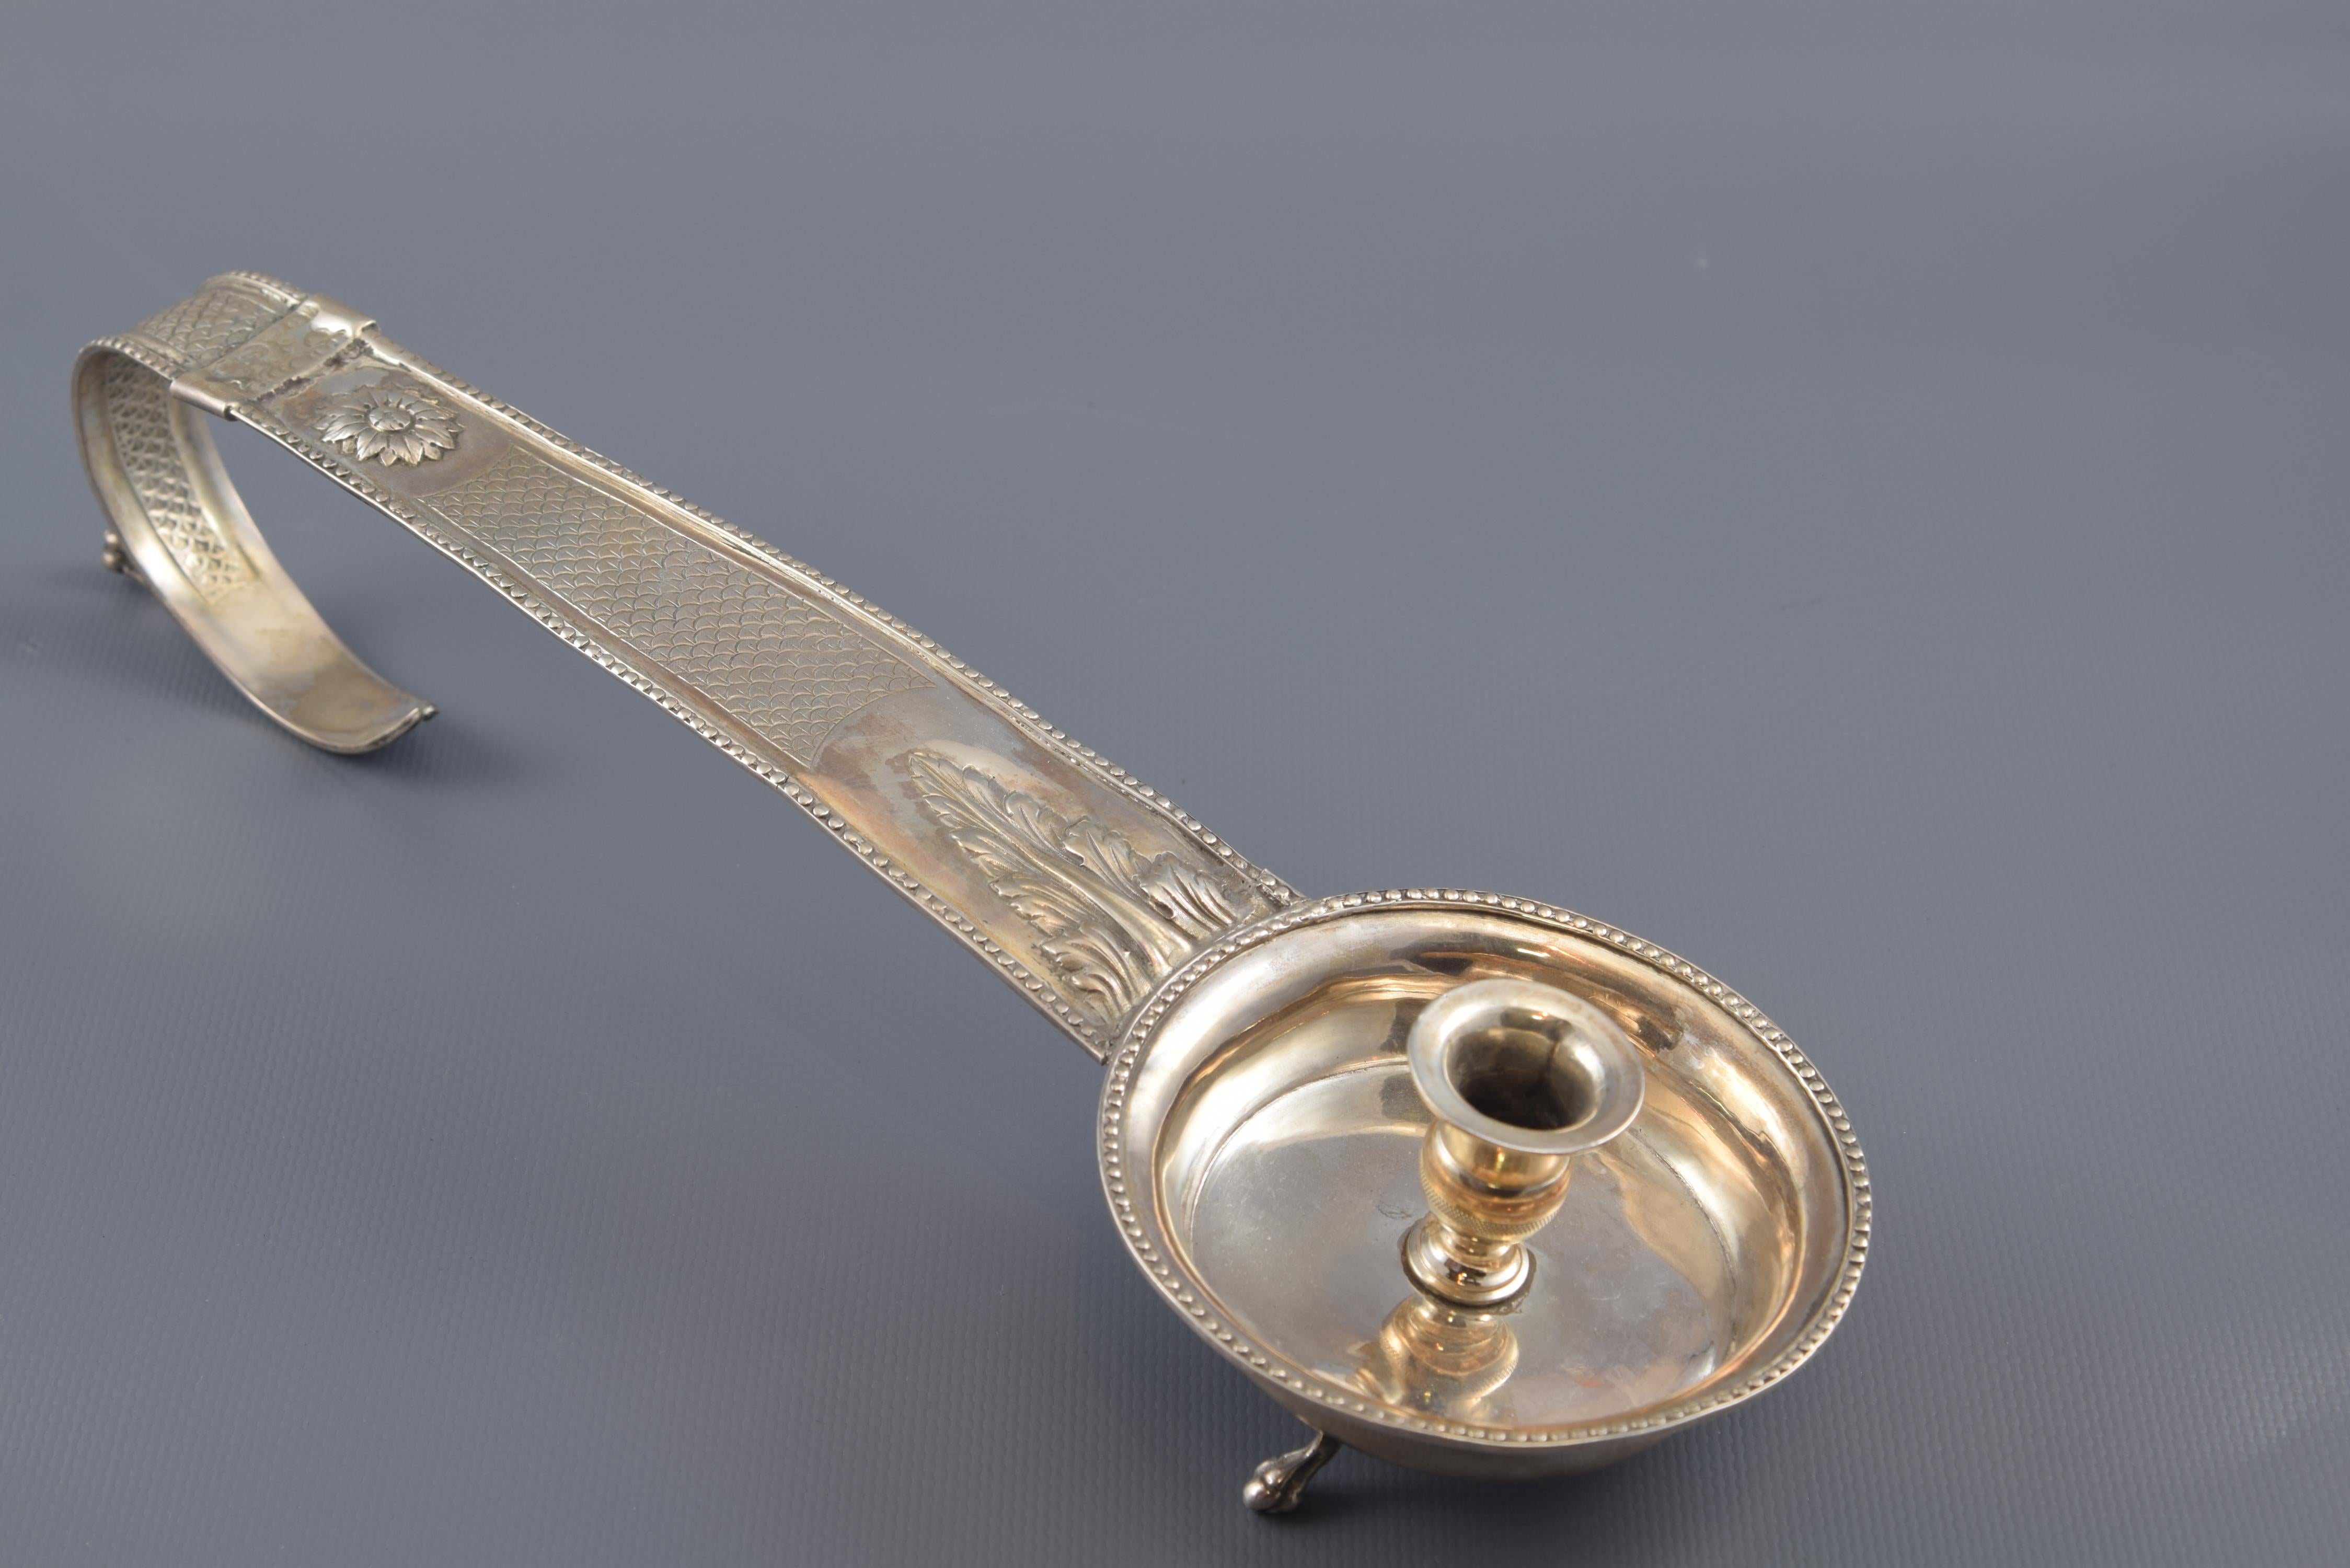 Silver candlestcik or candle holder. Francesc P. Arquer, Barcelona, circa 1825.
With contrast and derisive marks.
Silver candlestick in its color with bowl raised on two small legs and flat handle (curved towards the end, area where the third leg